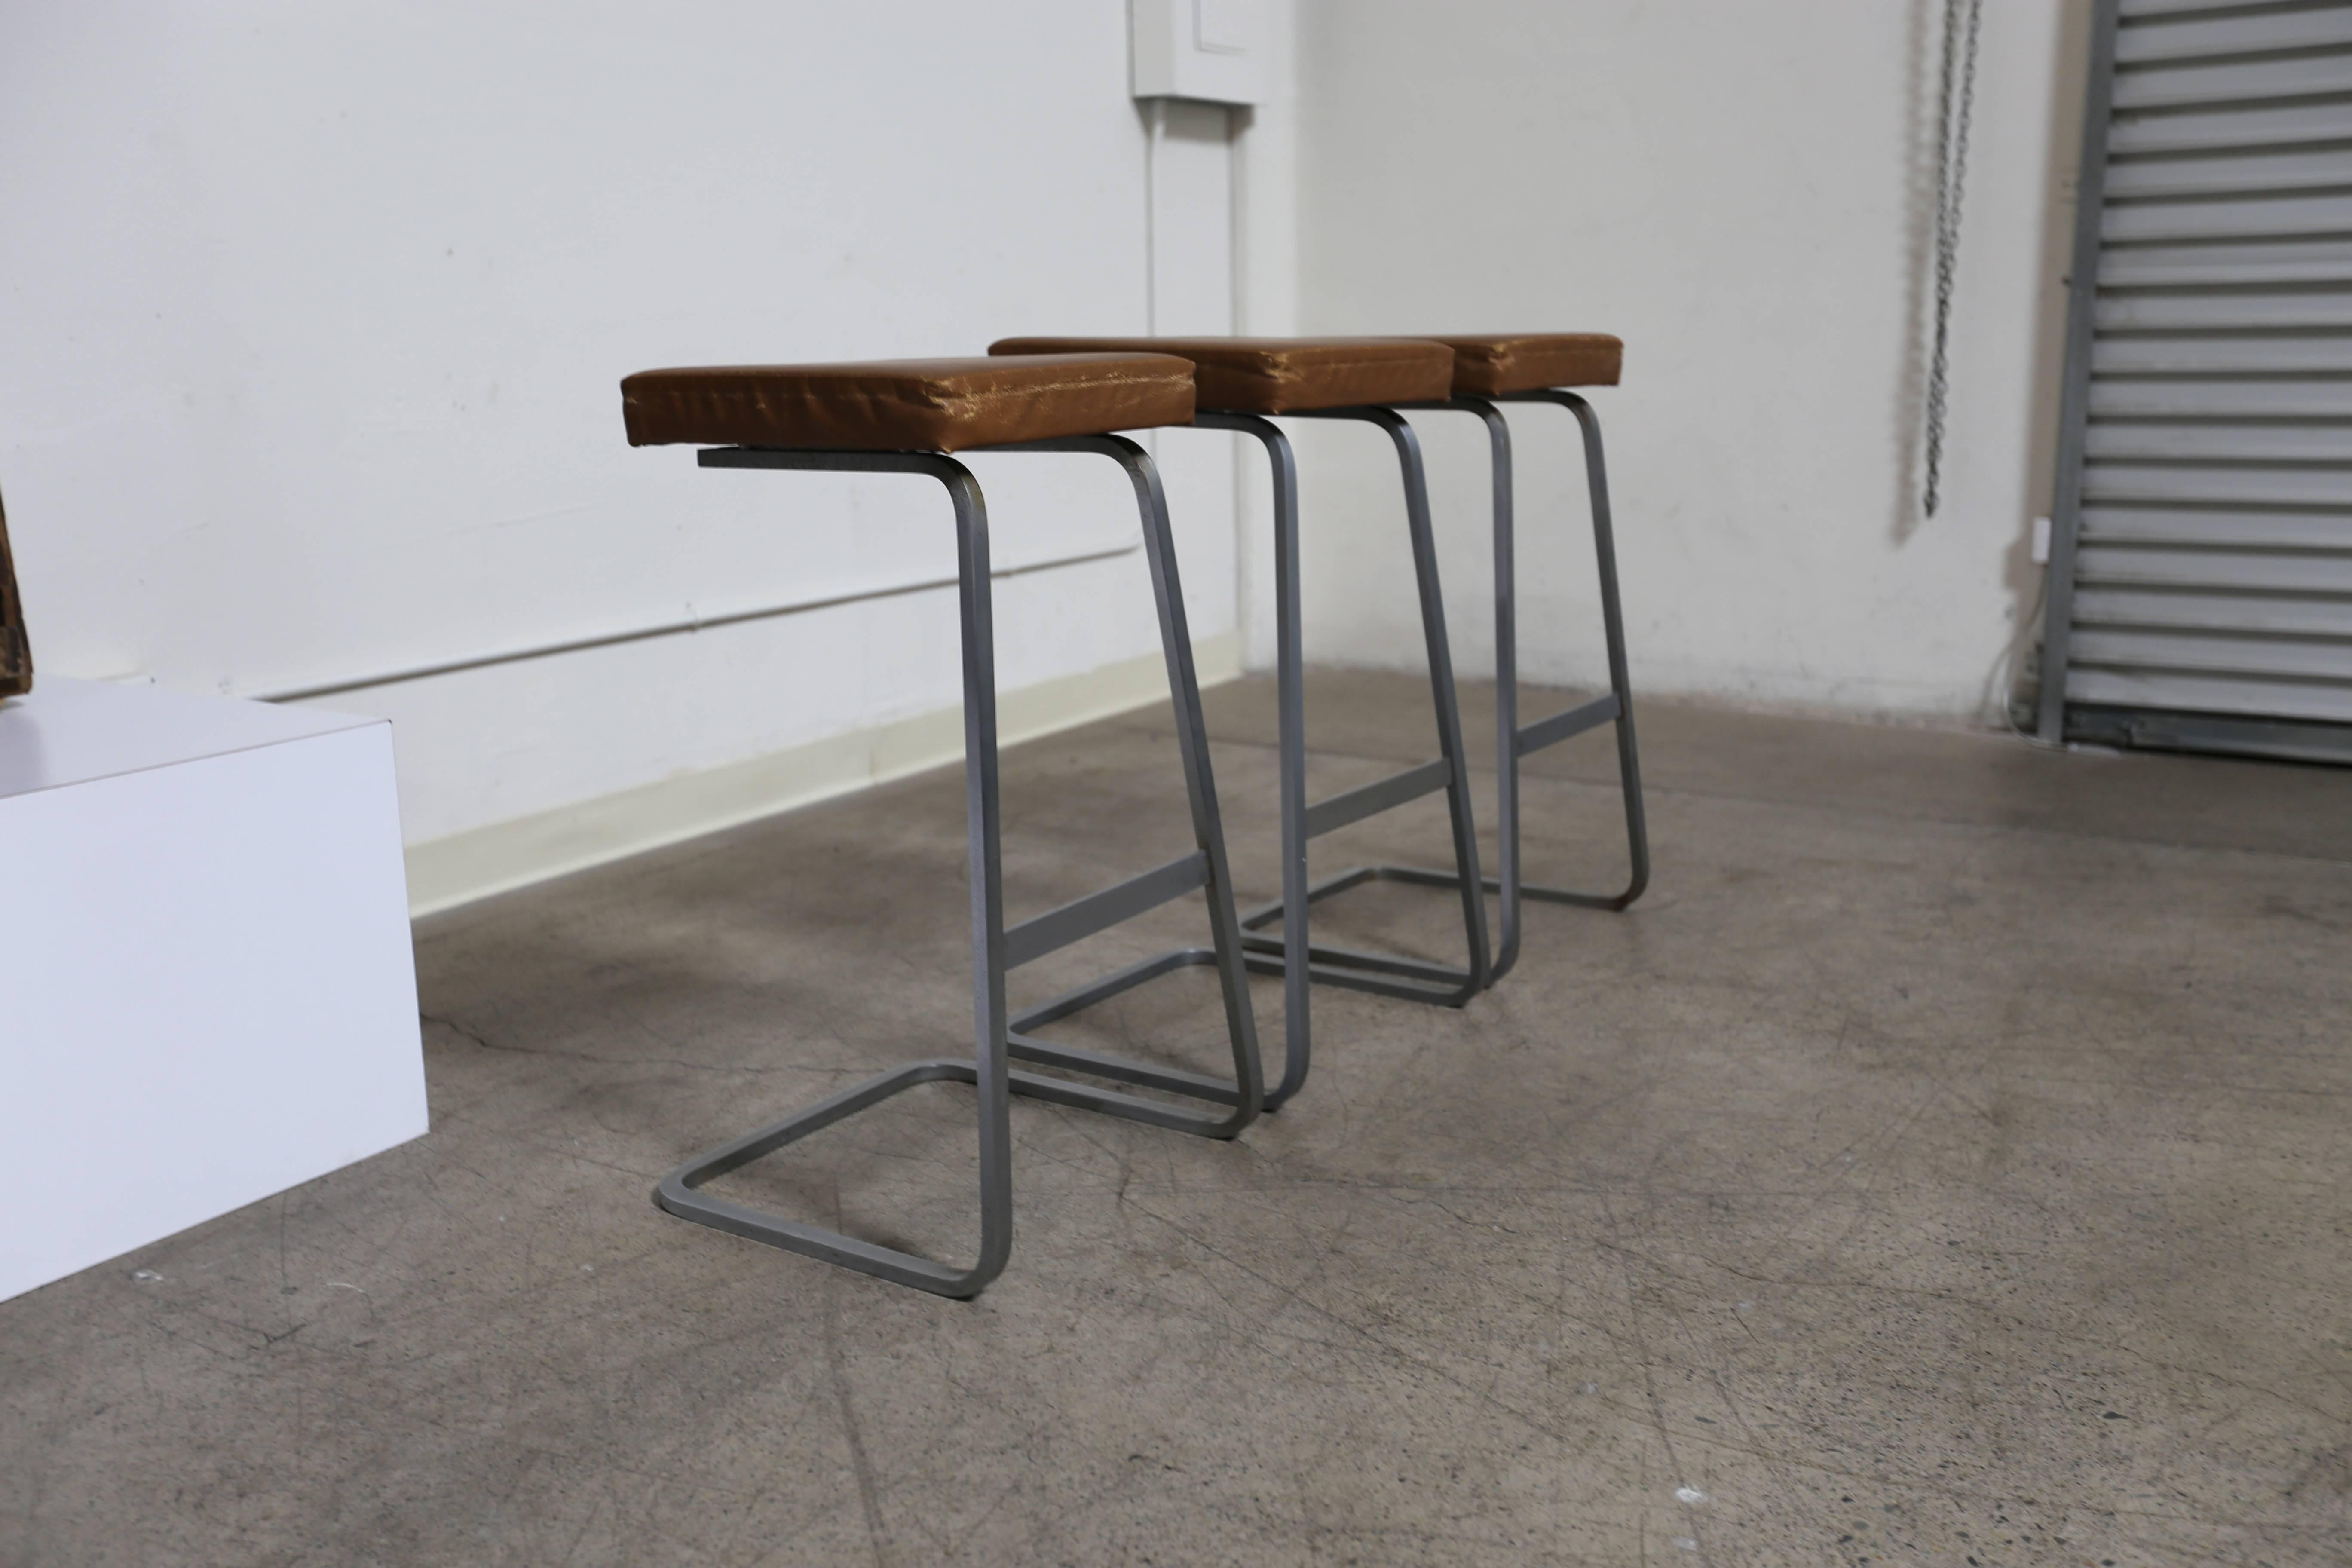 Early bar stools by Ludwig Mies van der Rohe for Knoll.